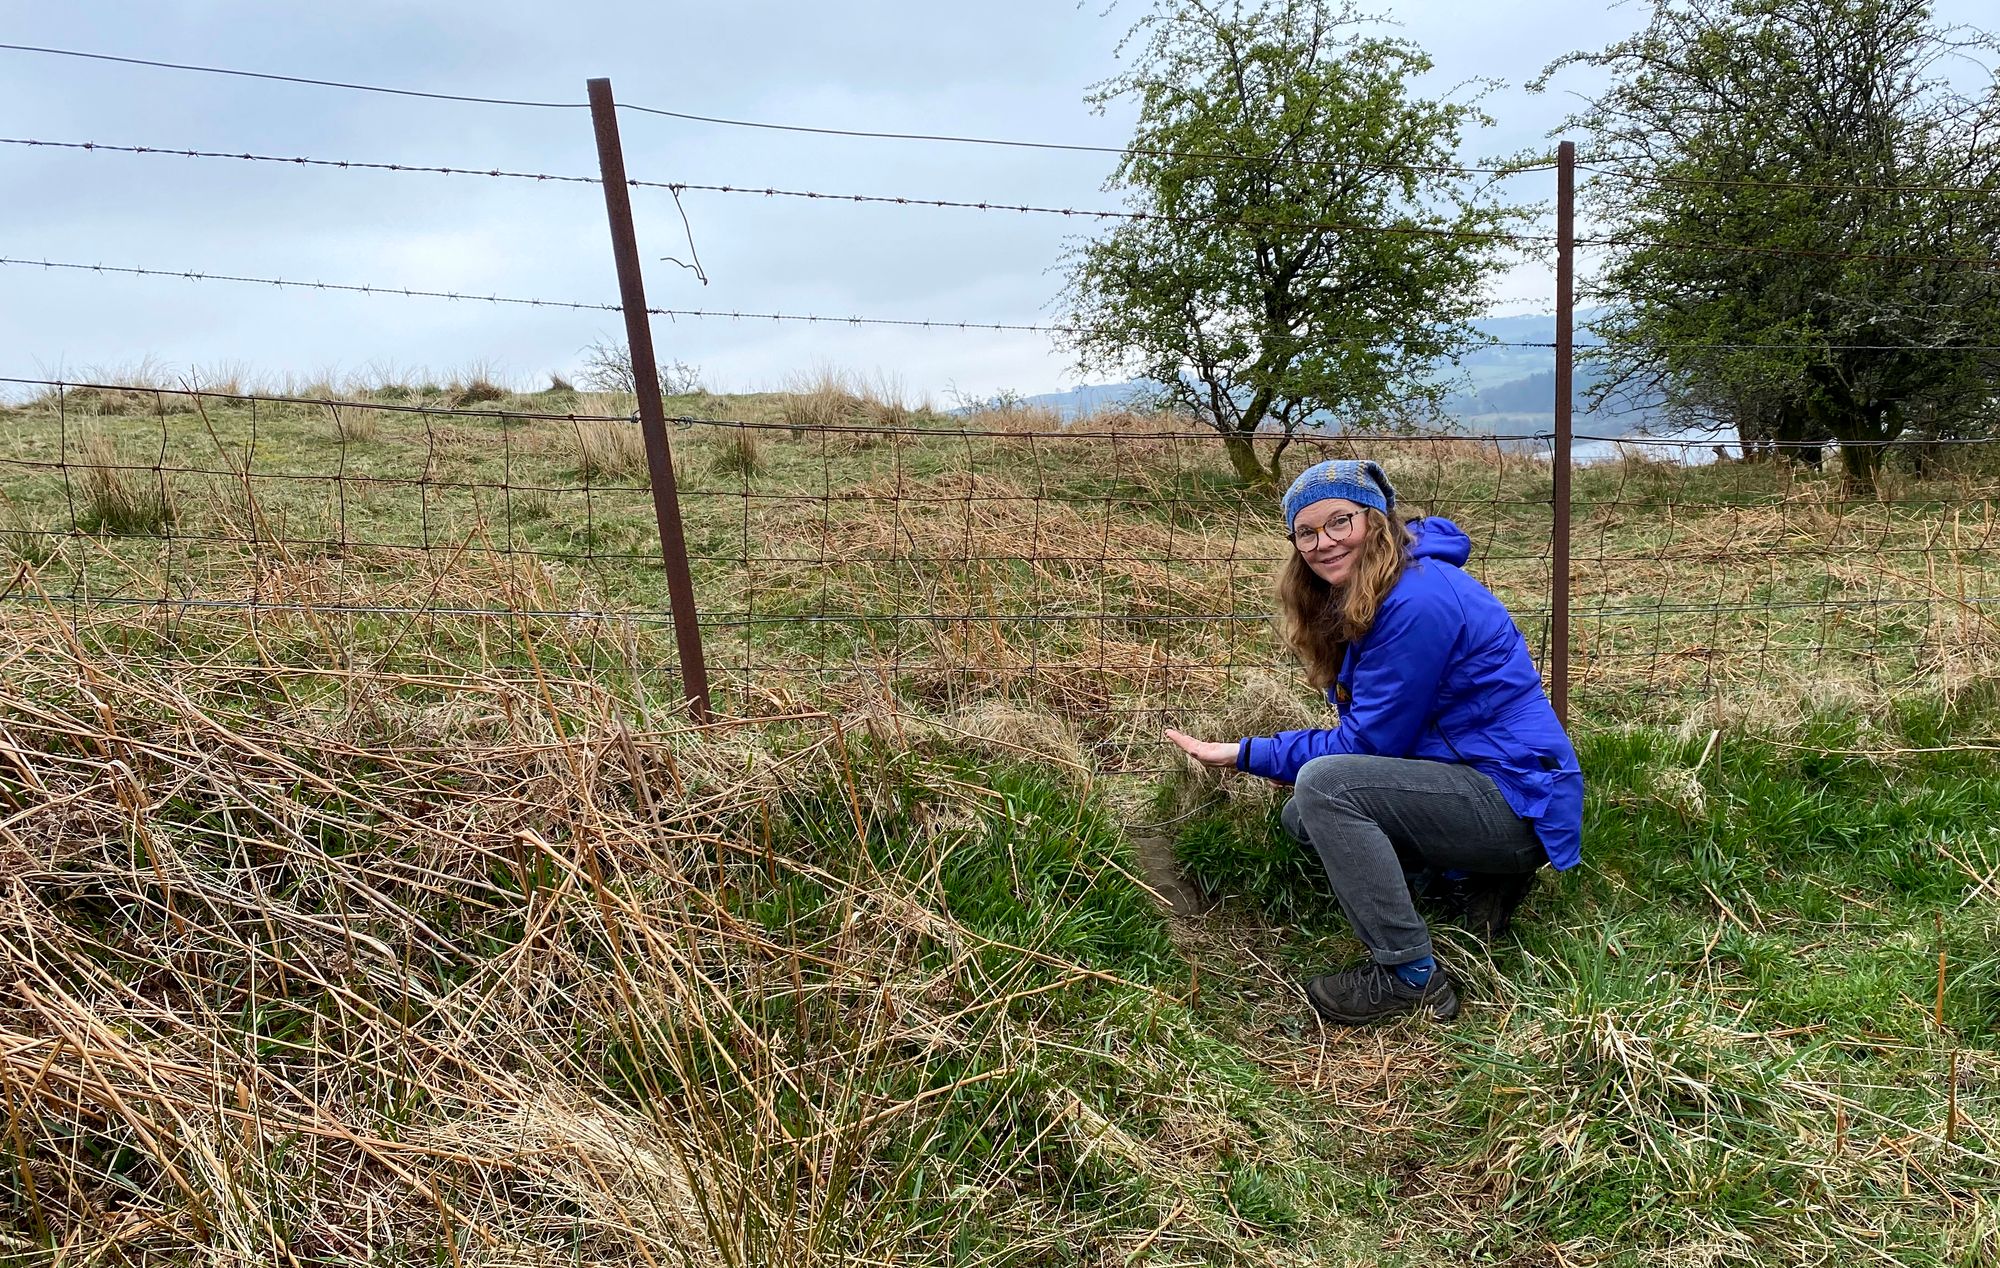 A photo of Diane kneeling next to a gap below a wire fence, indicating where badgers pass through